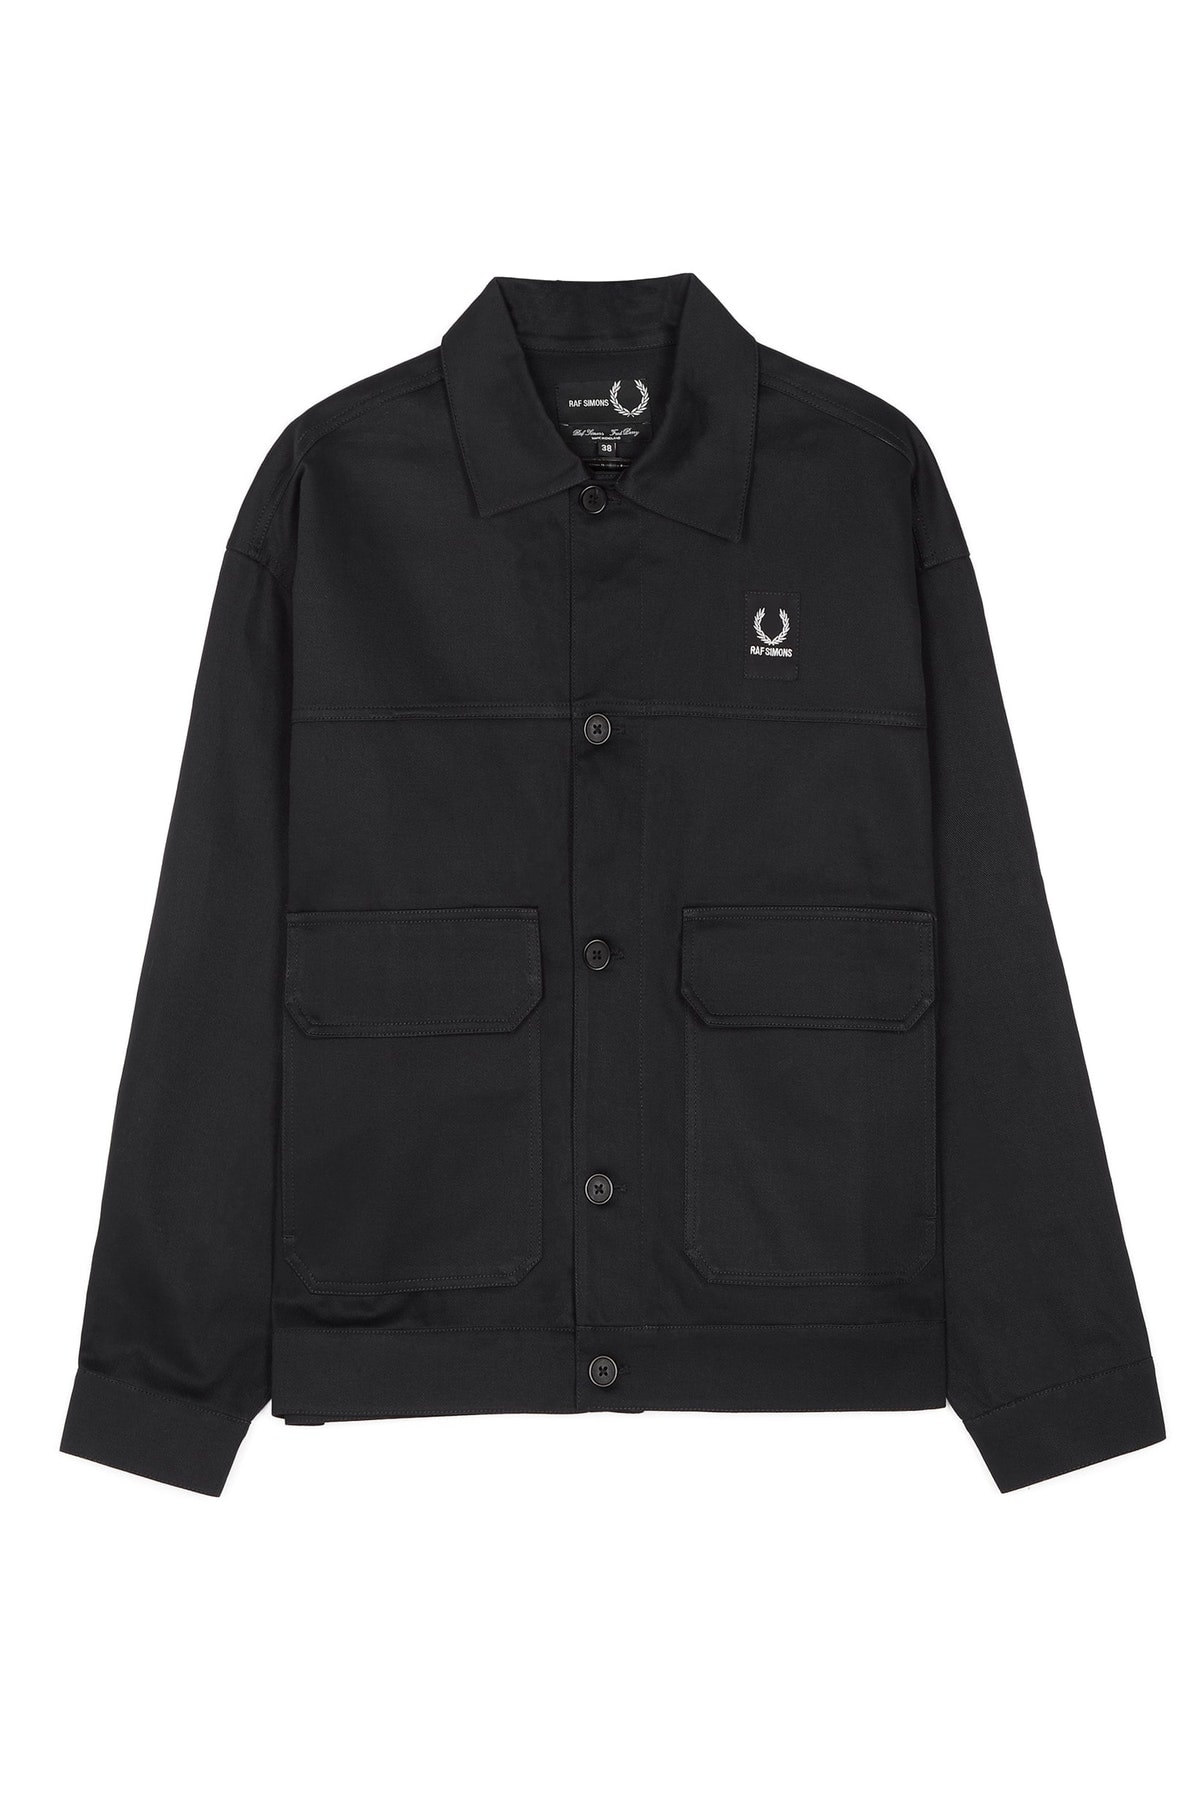 Raf Simons Fred Perry Pull over